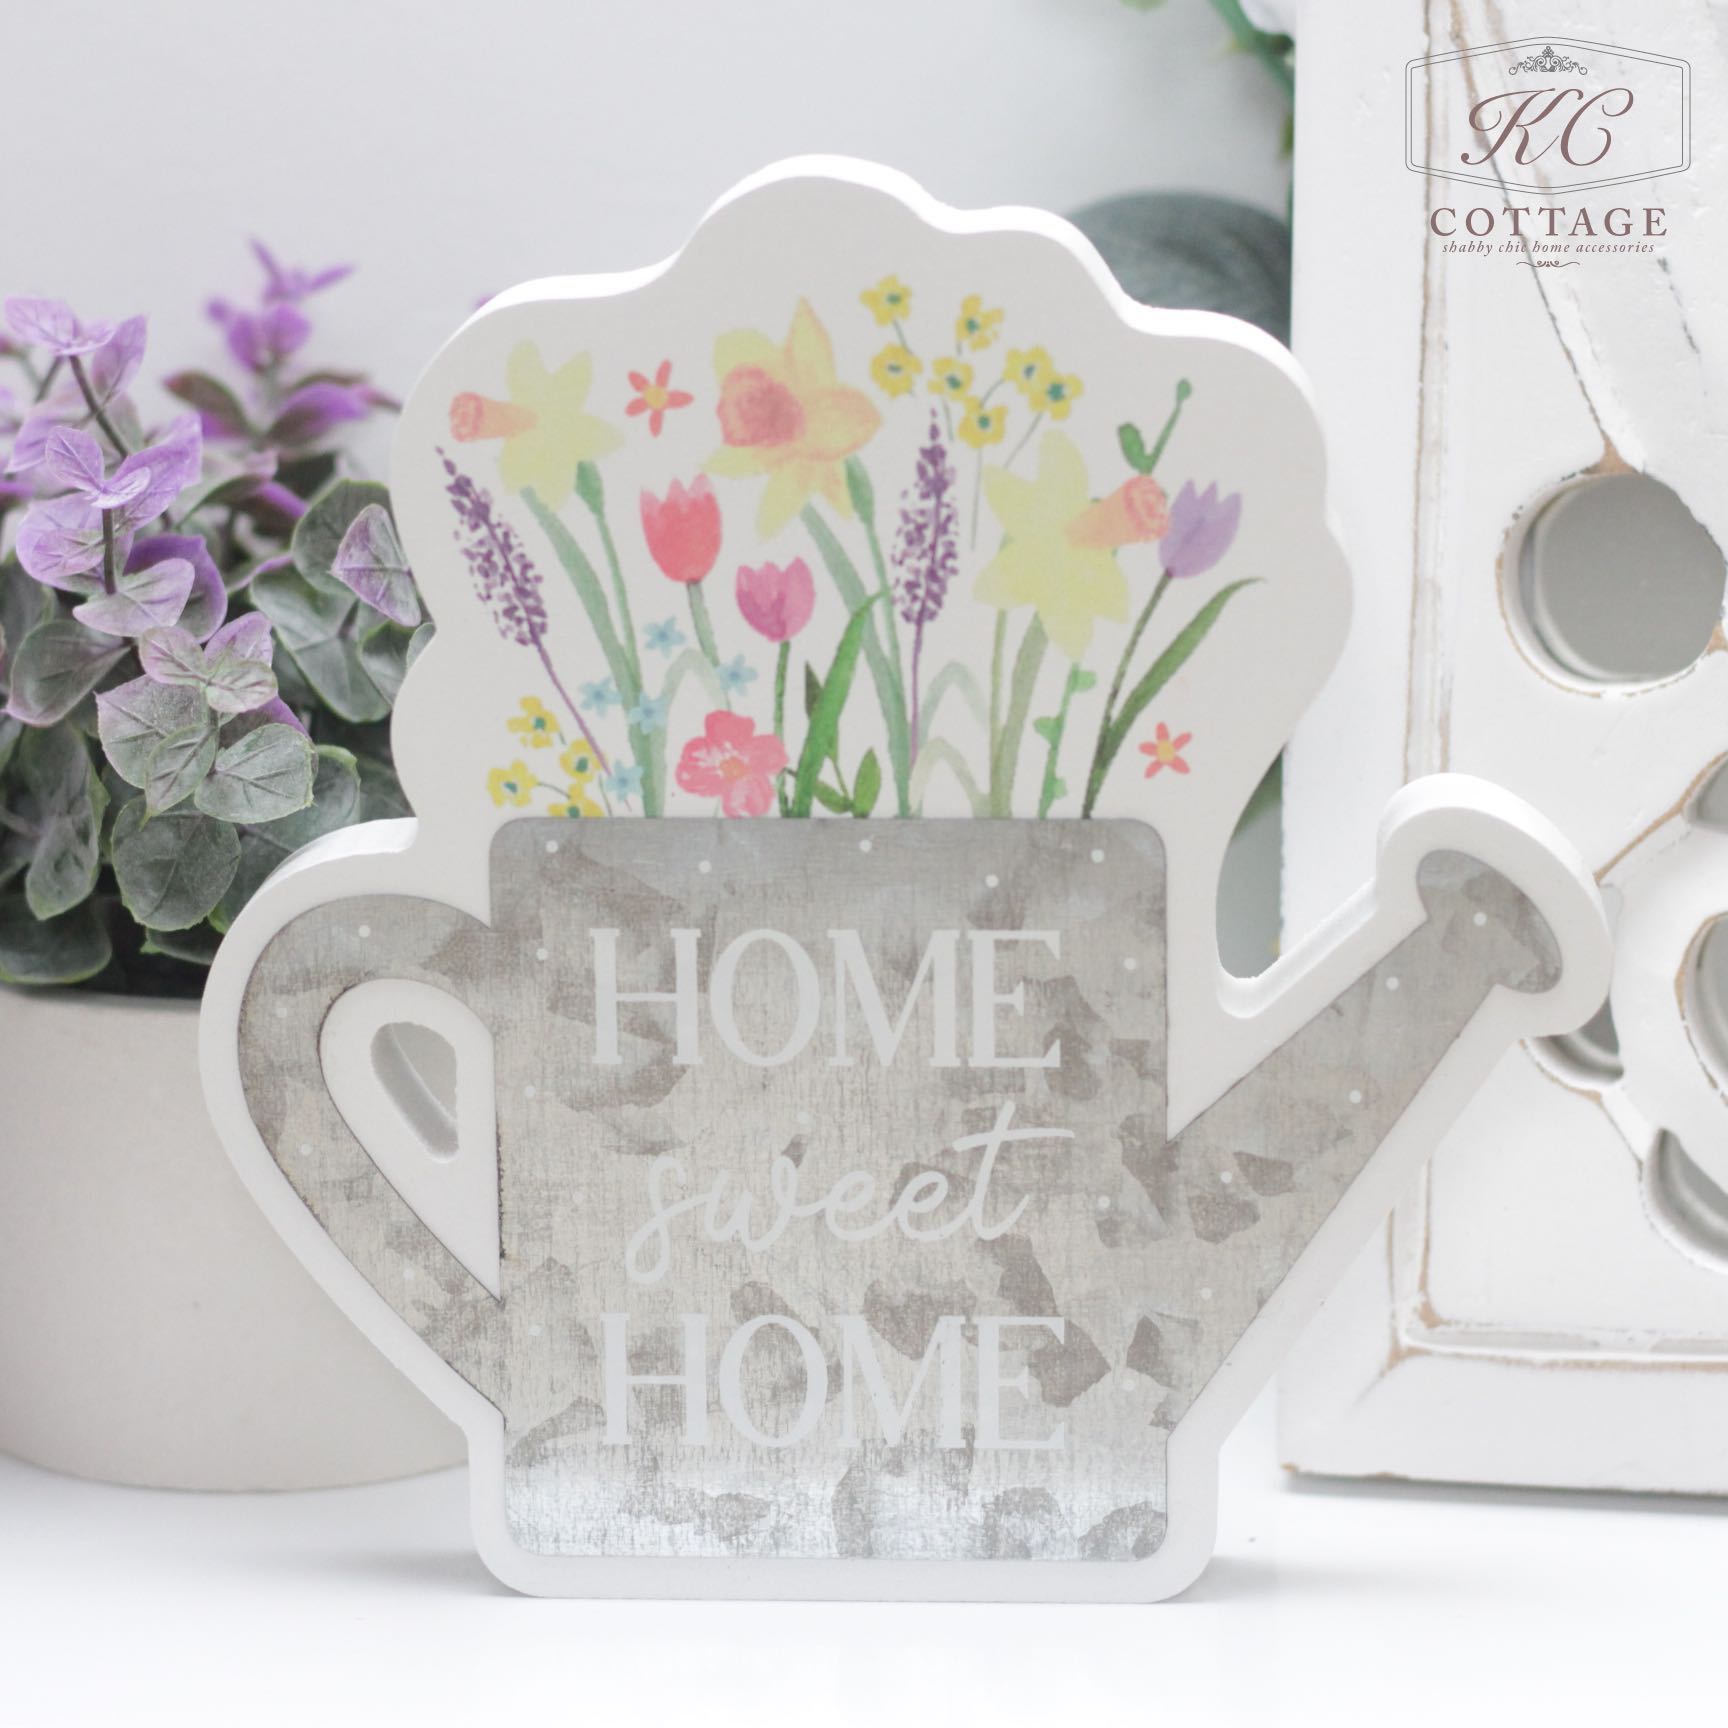 A Home Sweet Home Wooden Watering Can with floral designs at the top and the words "Home Sweet Home" written on it. Purple flowers and greenery are in the background, complemented by a rustic white decor piece on the right. Perfect for enhancing your home decor.